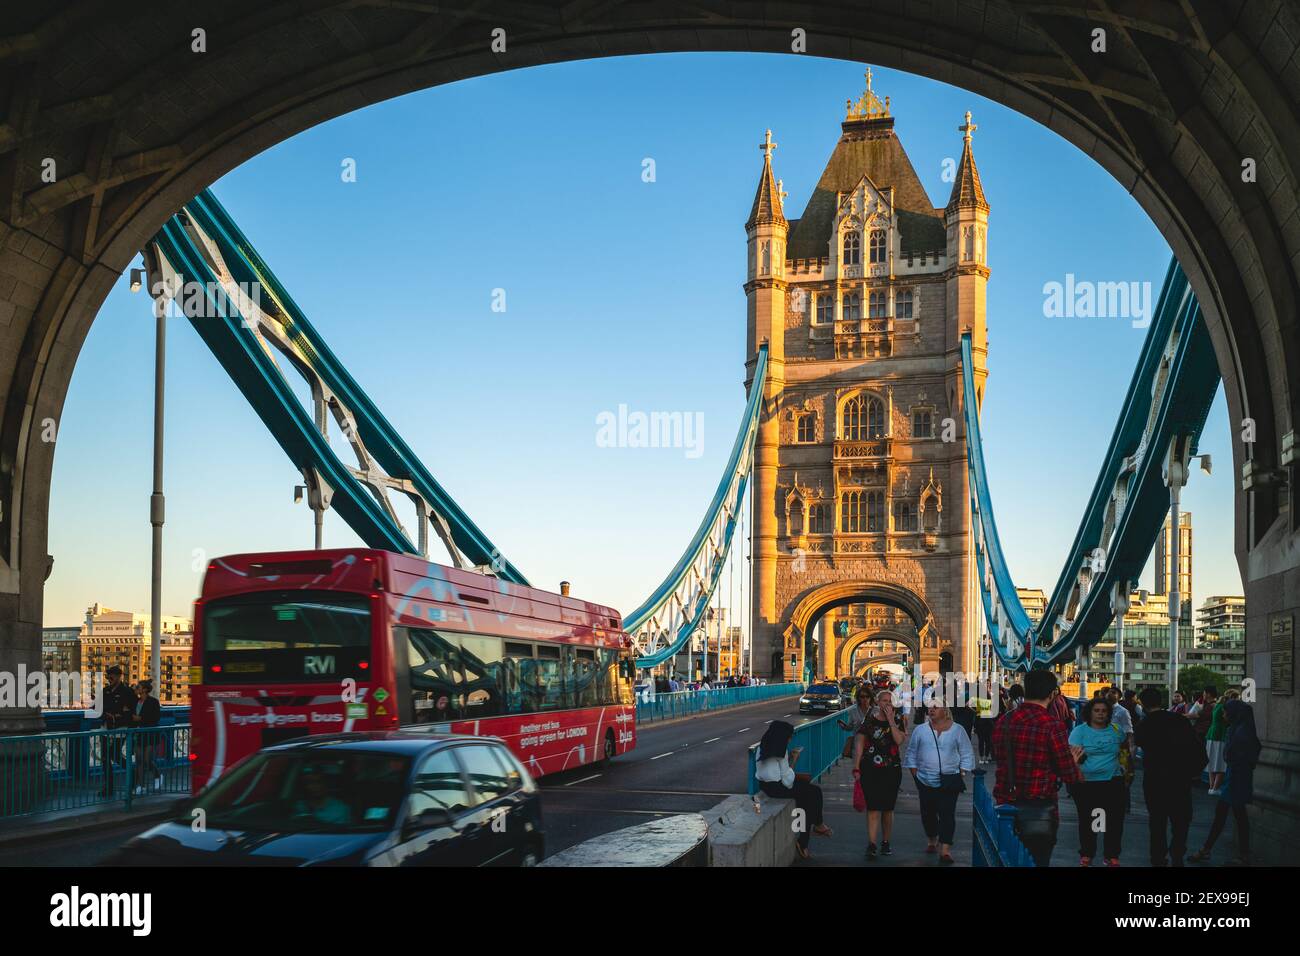 June 29, 2018: scenery on tower bridge, a combined bascule and suspension bridge crossing the River Thames in London, England, UK. It was built betwee Stock Photo